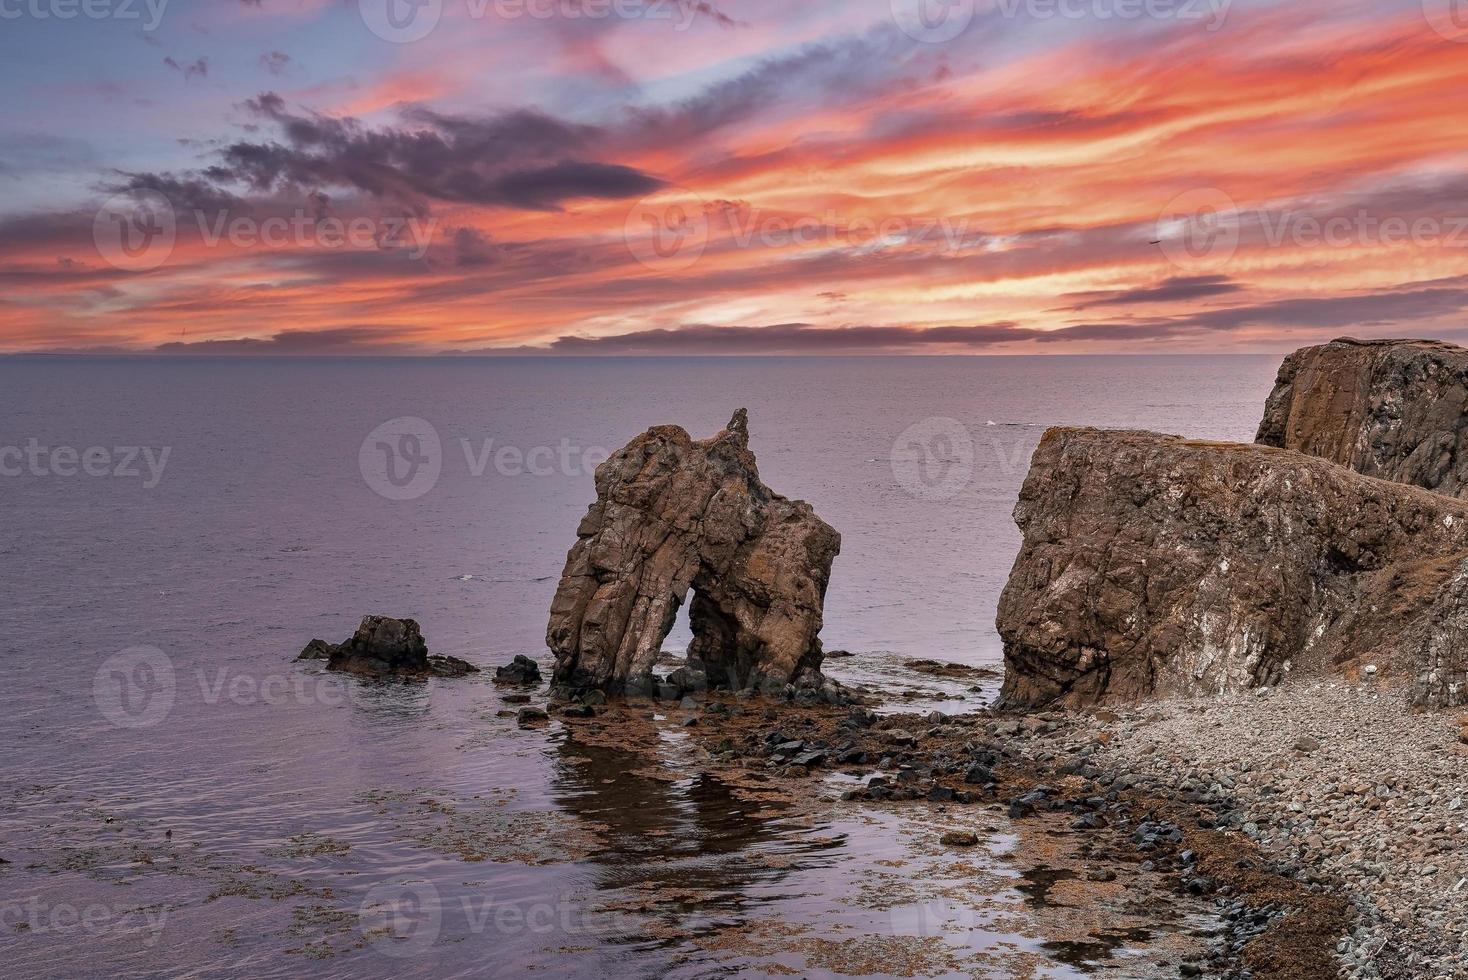 Scenic view of rock formations at seashore against dramatic sky during sunset photo